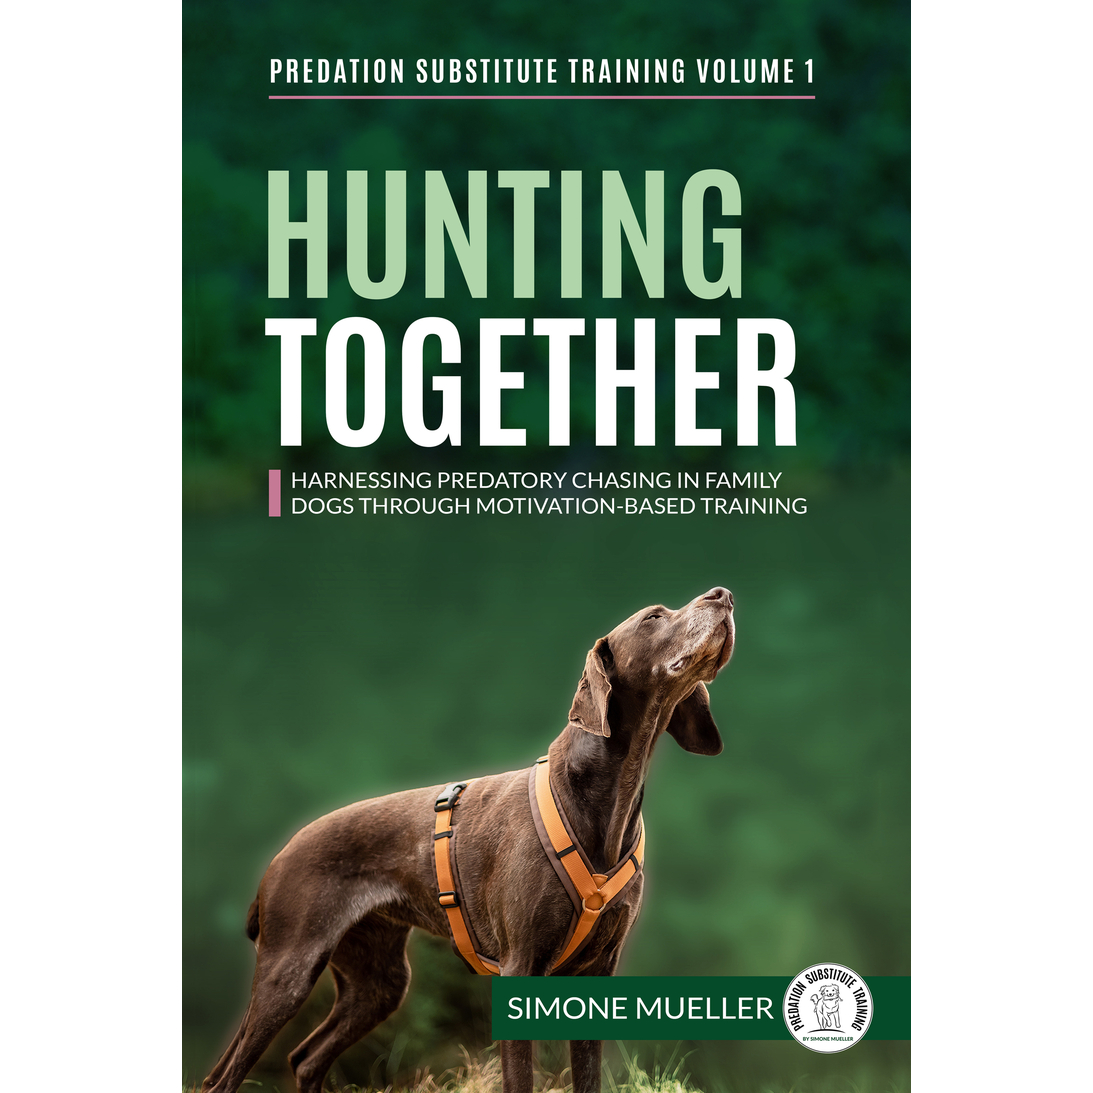 Hunting Together: Harnessing Predatory Chasing in Family Dogs through Motivation-Based Training (Predation Substitute Training) Paperback by Simone Mueller– May 1, 2023